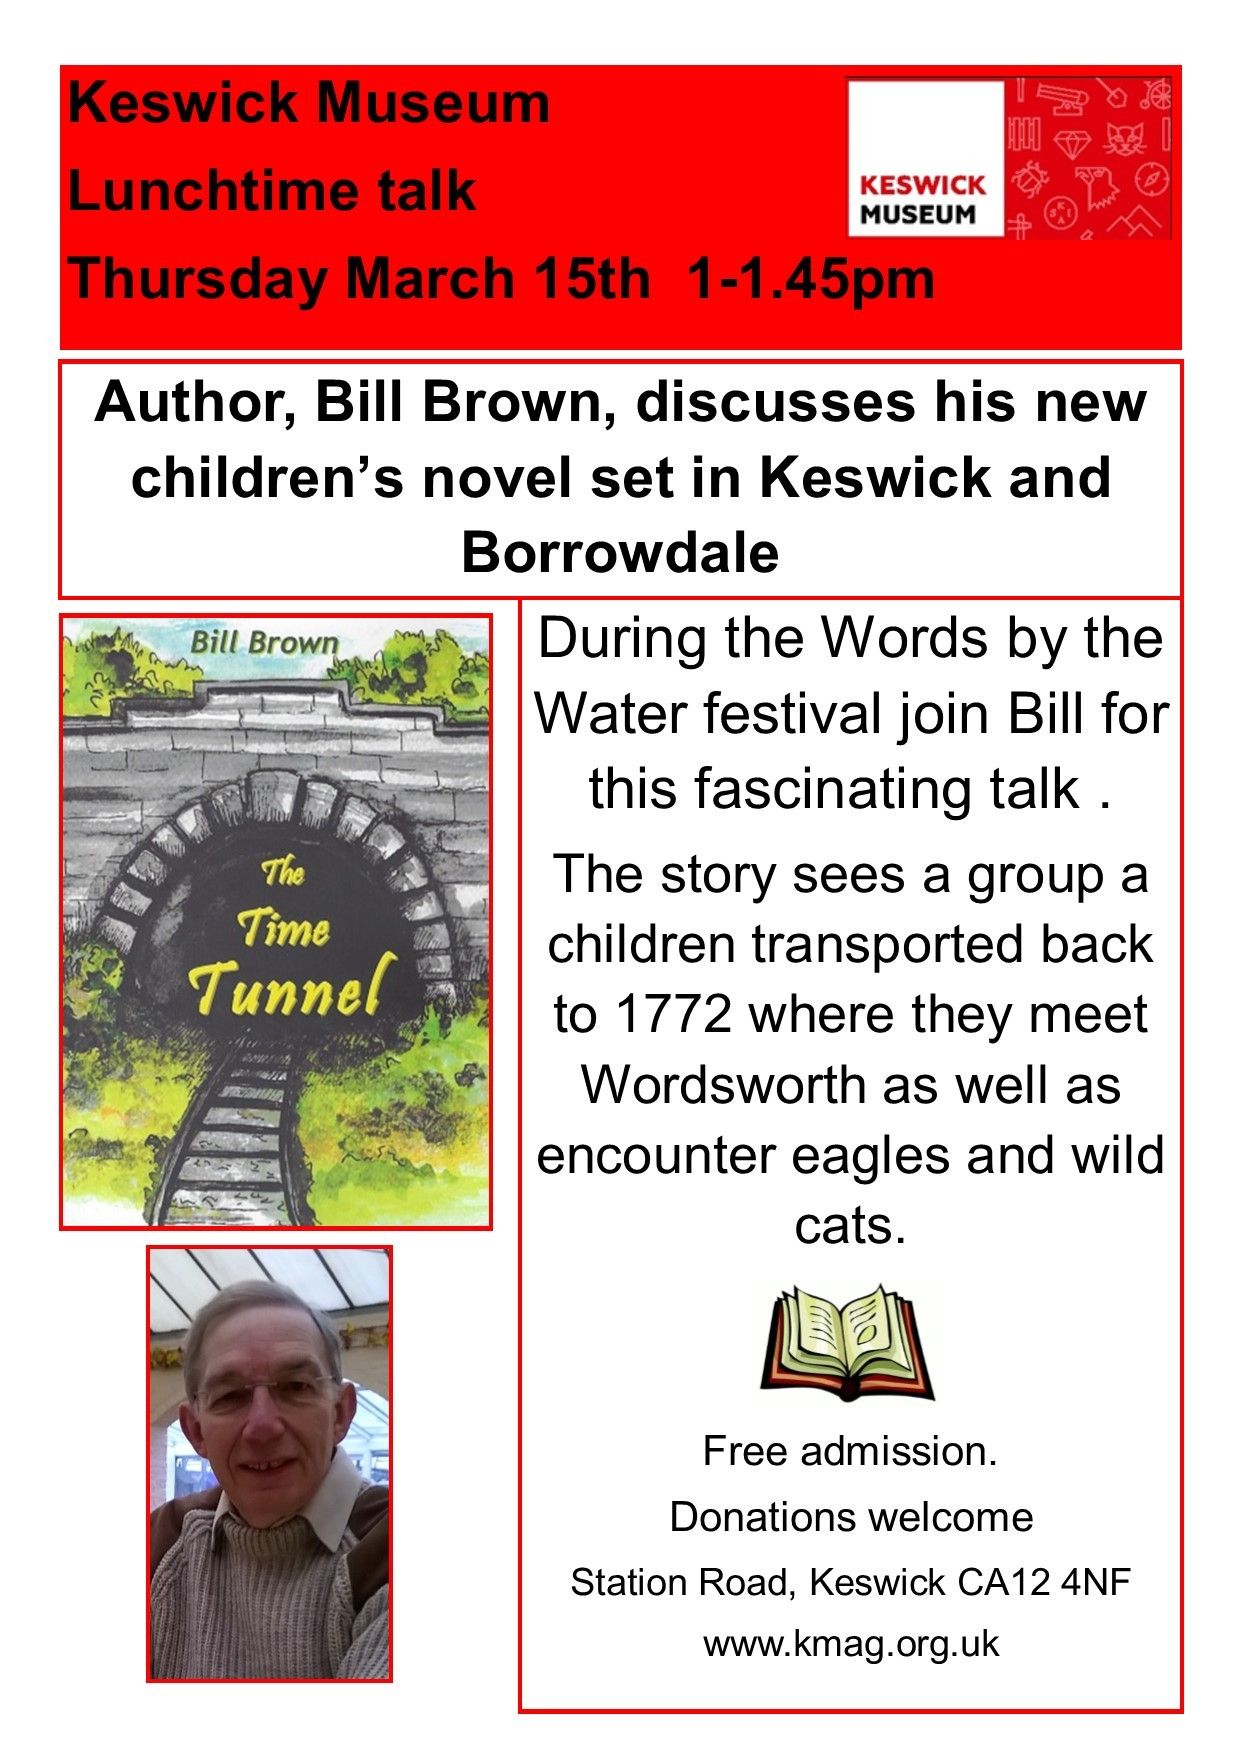 Author Bill Brown discusses his new children's novel